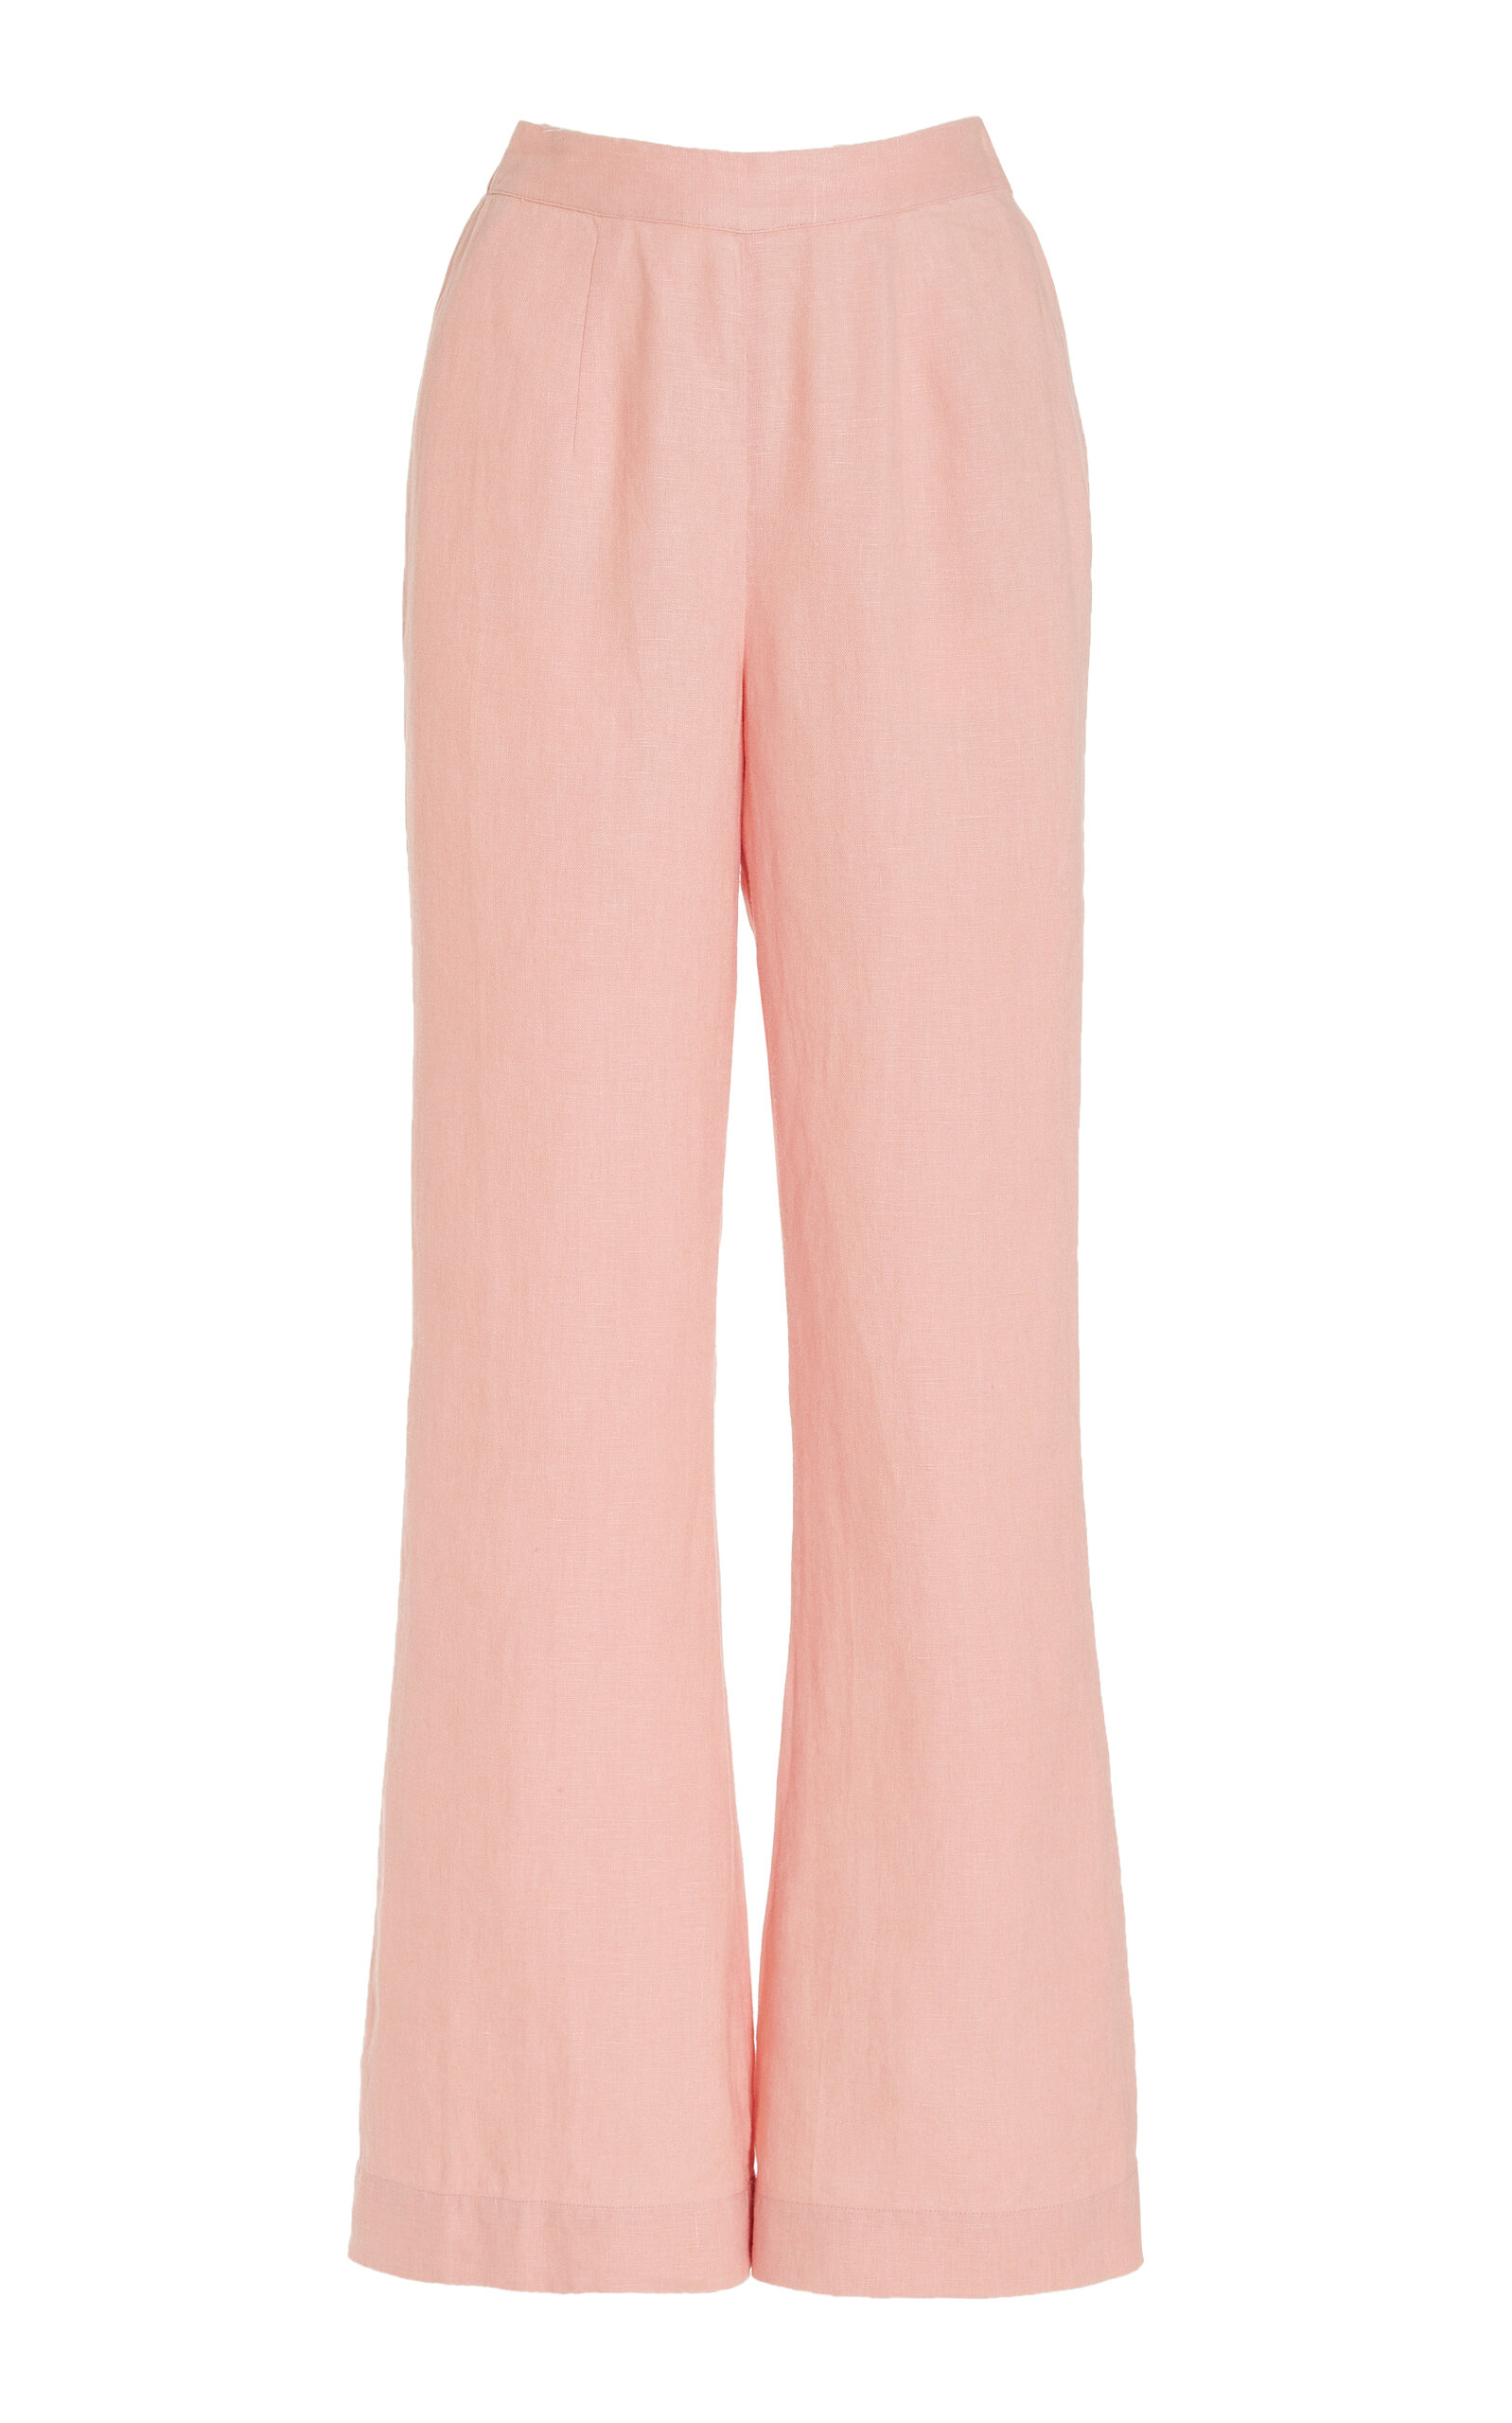 Tia Flared Linen Trousers